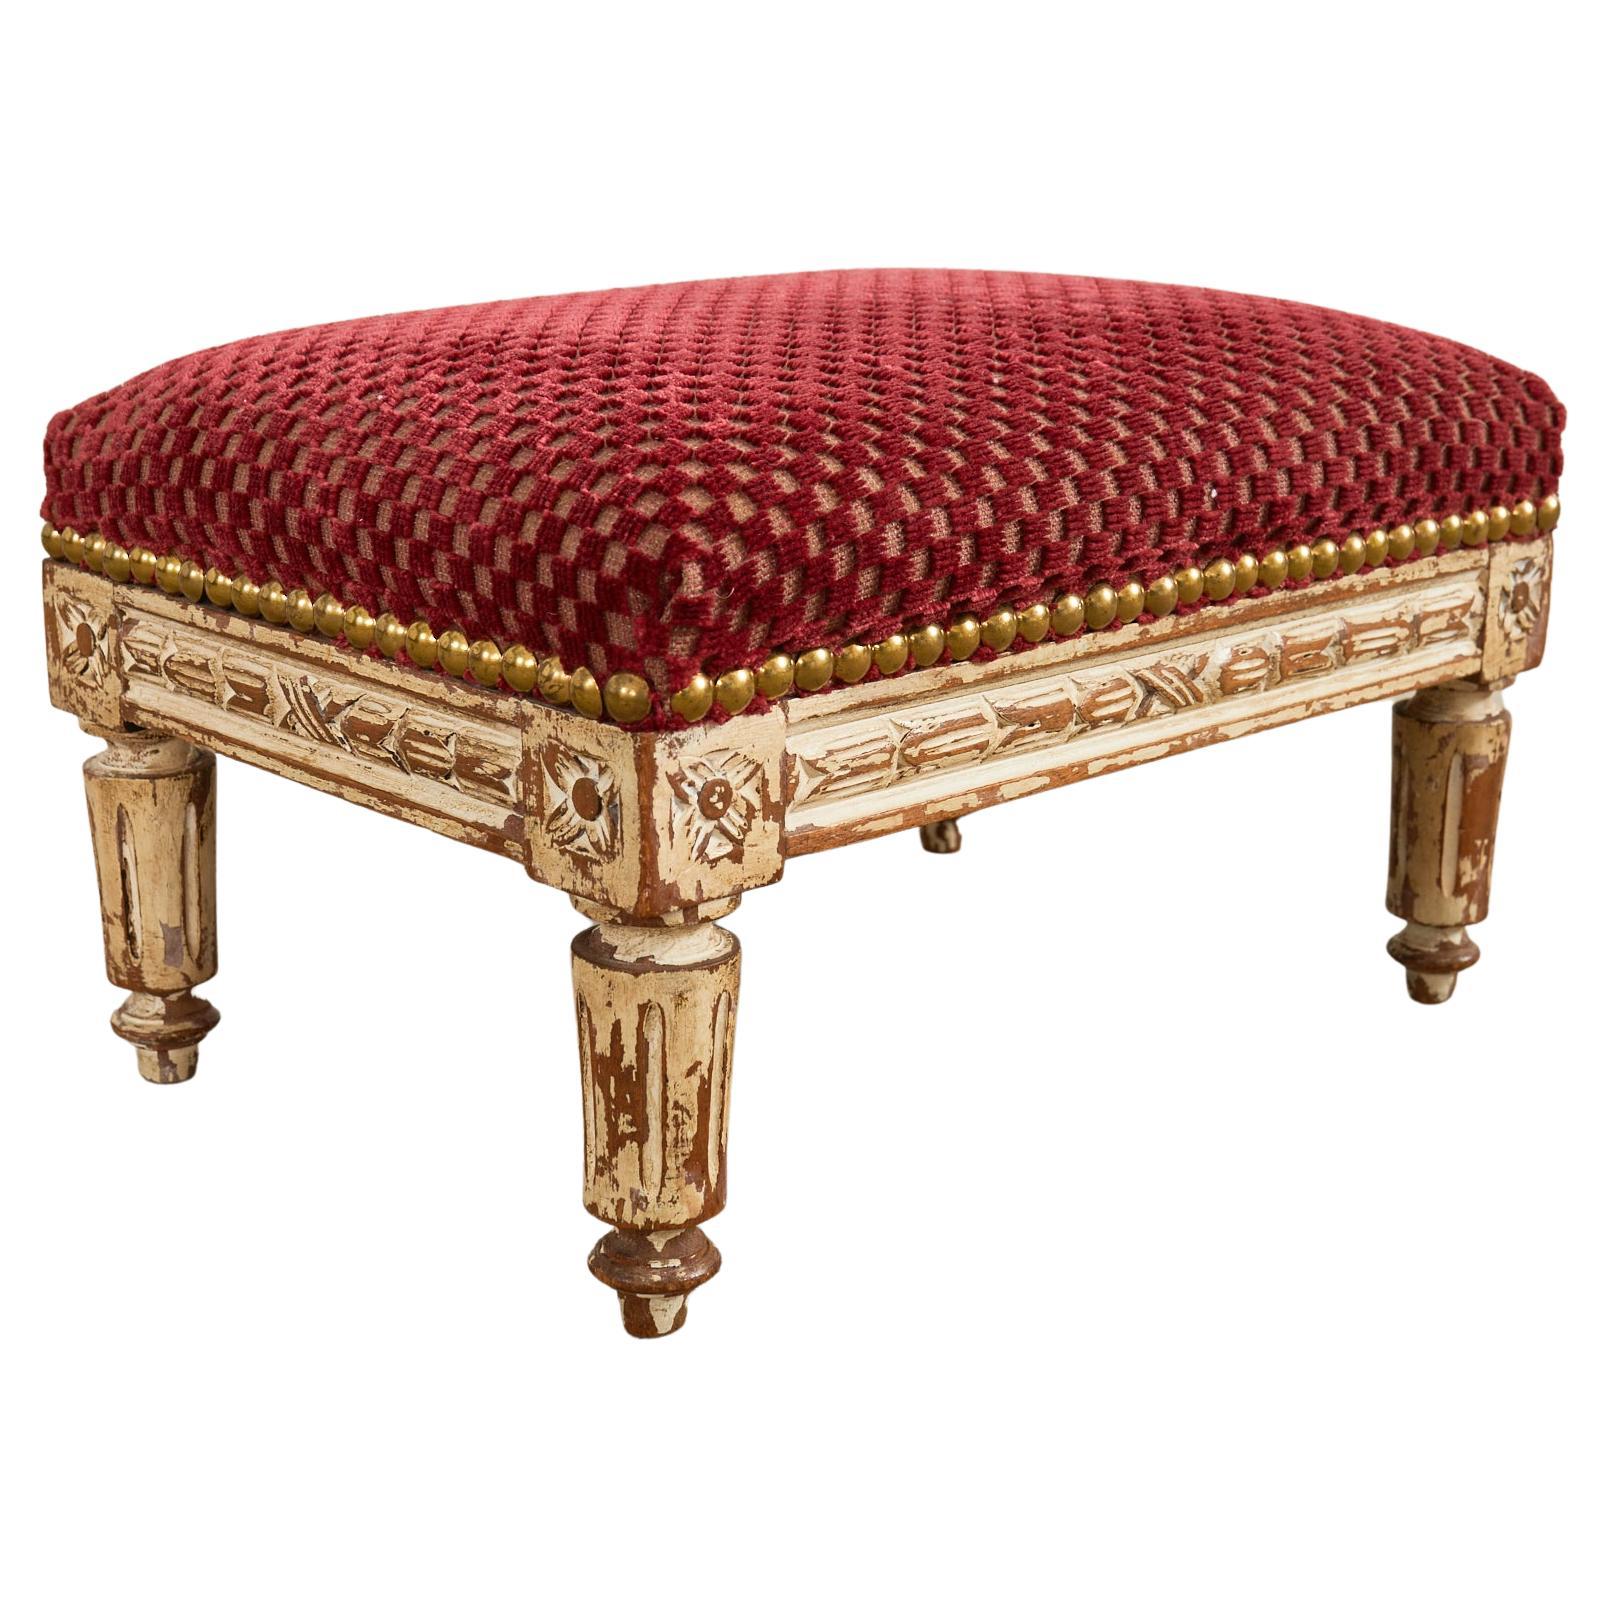 19th Century French Louis XVI Diminutive Painted Mahogany Footstool For Sale